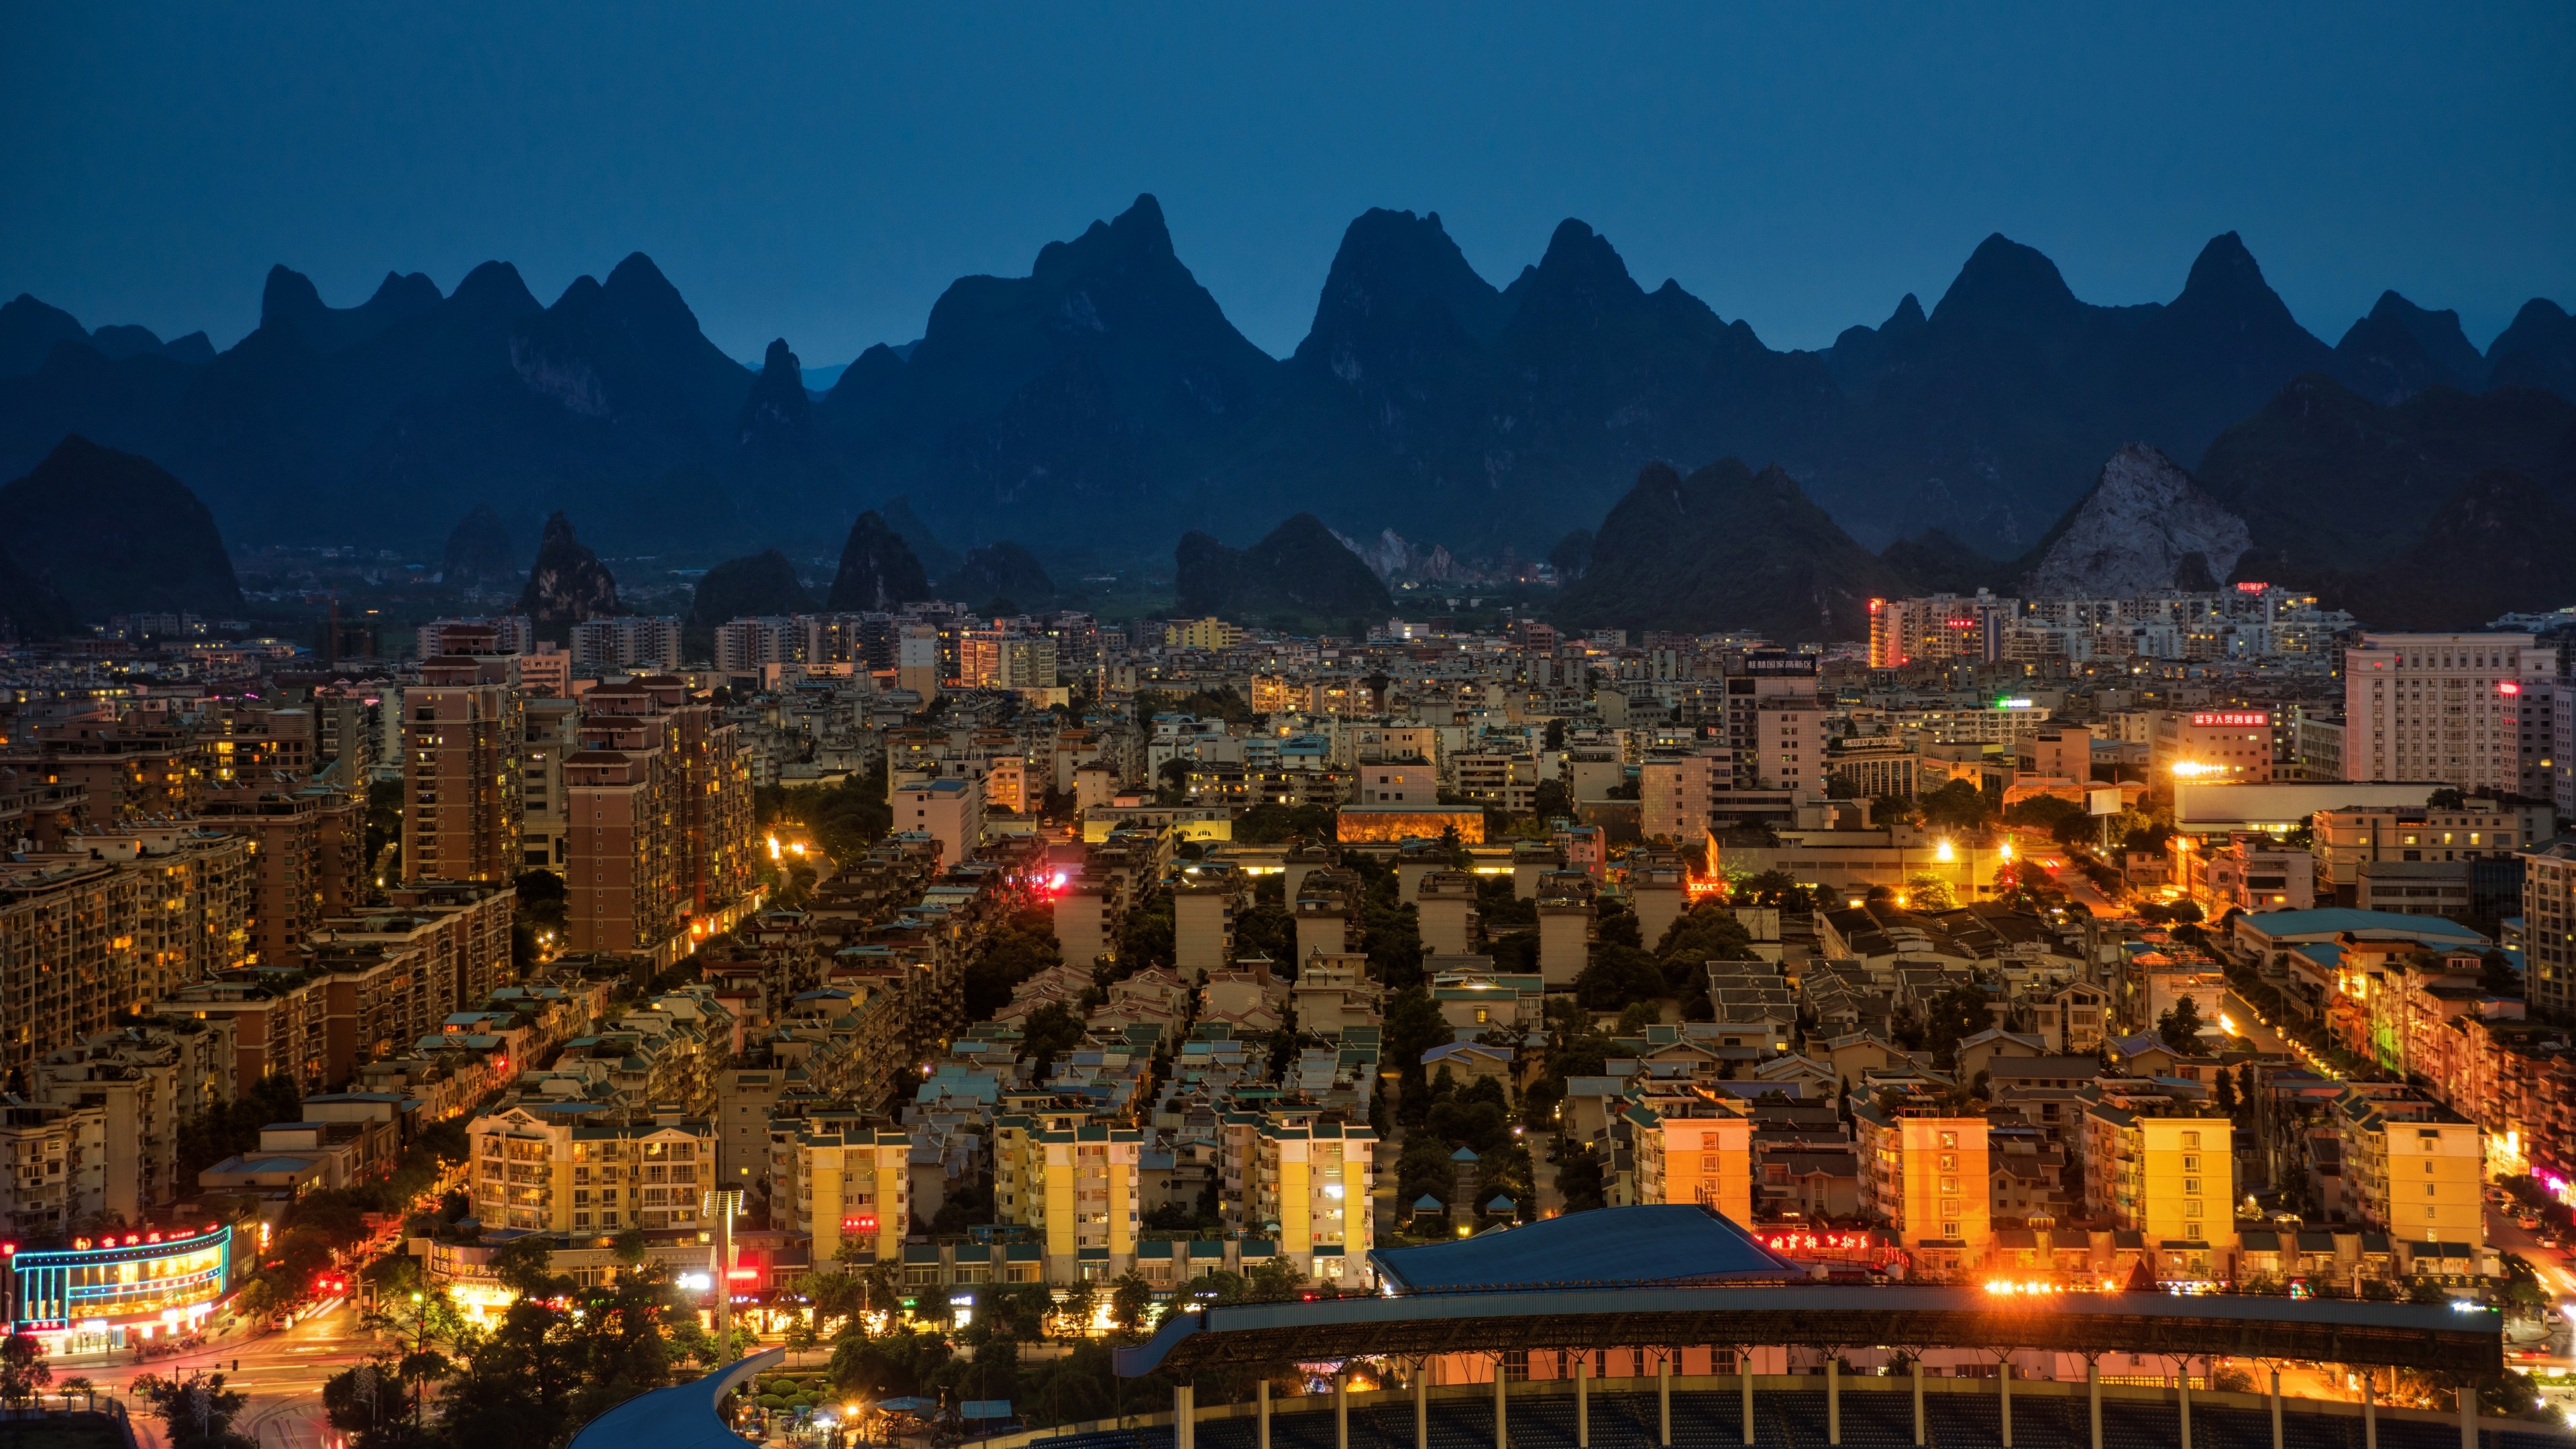 General 3840x2160 architecture building city cityscape evening lights street light China mountains Guilin Asia